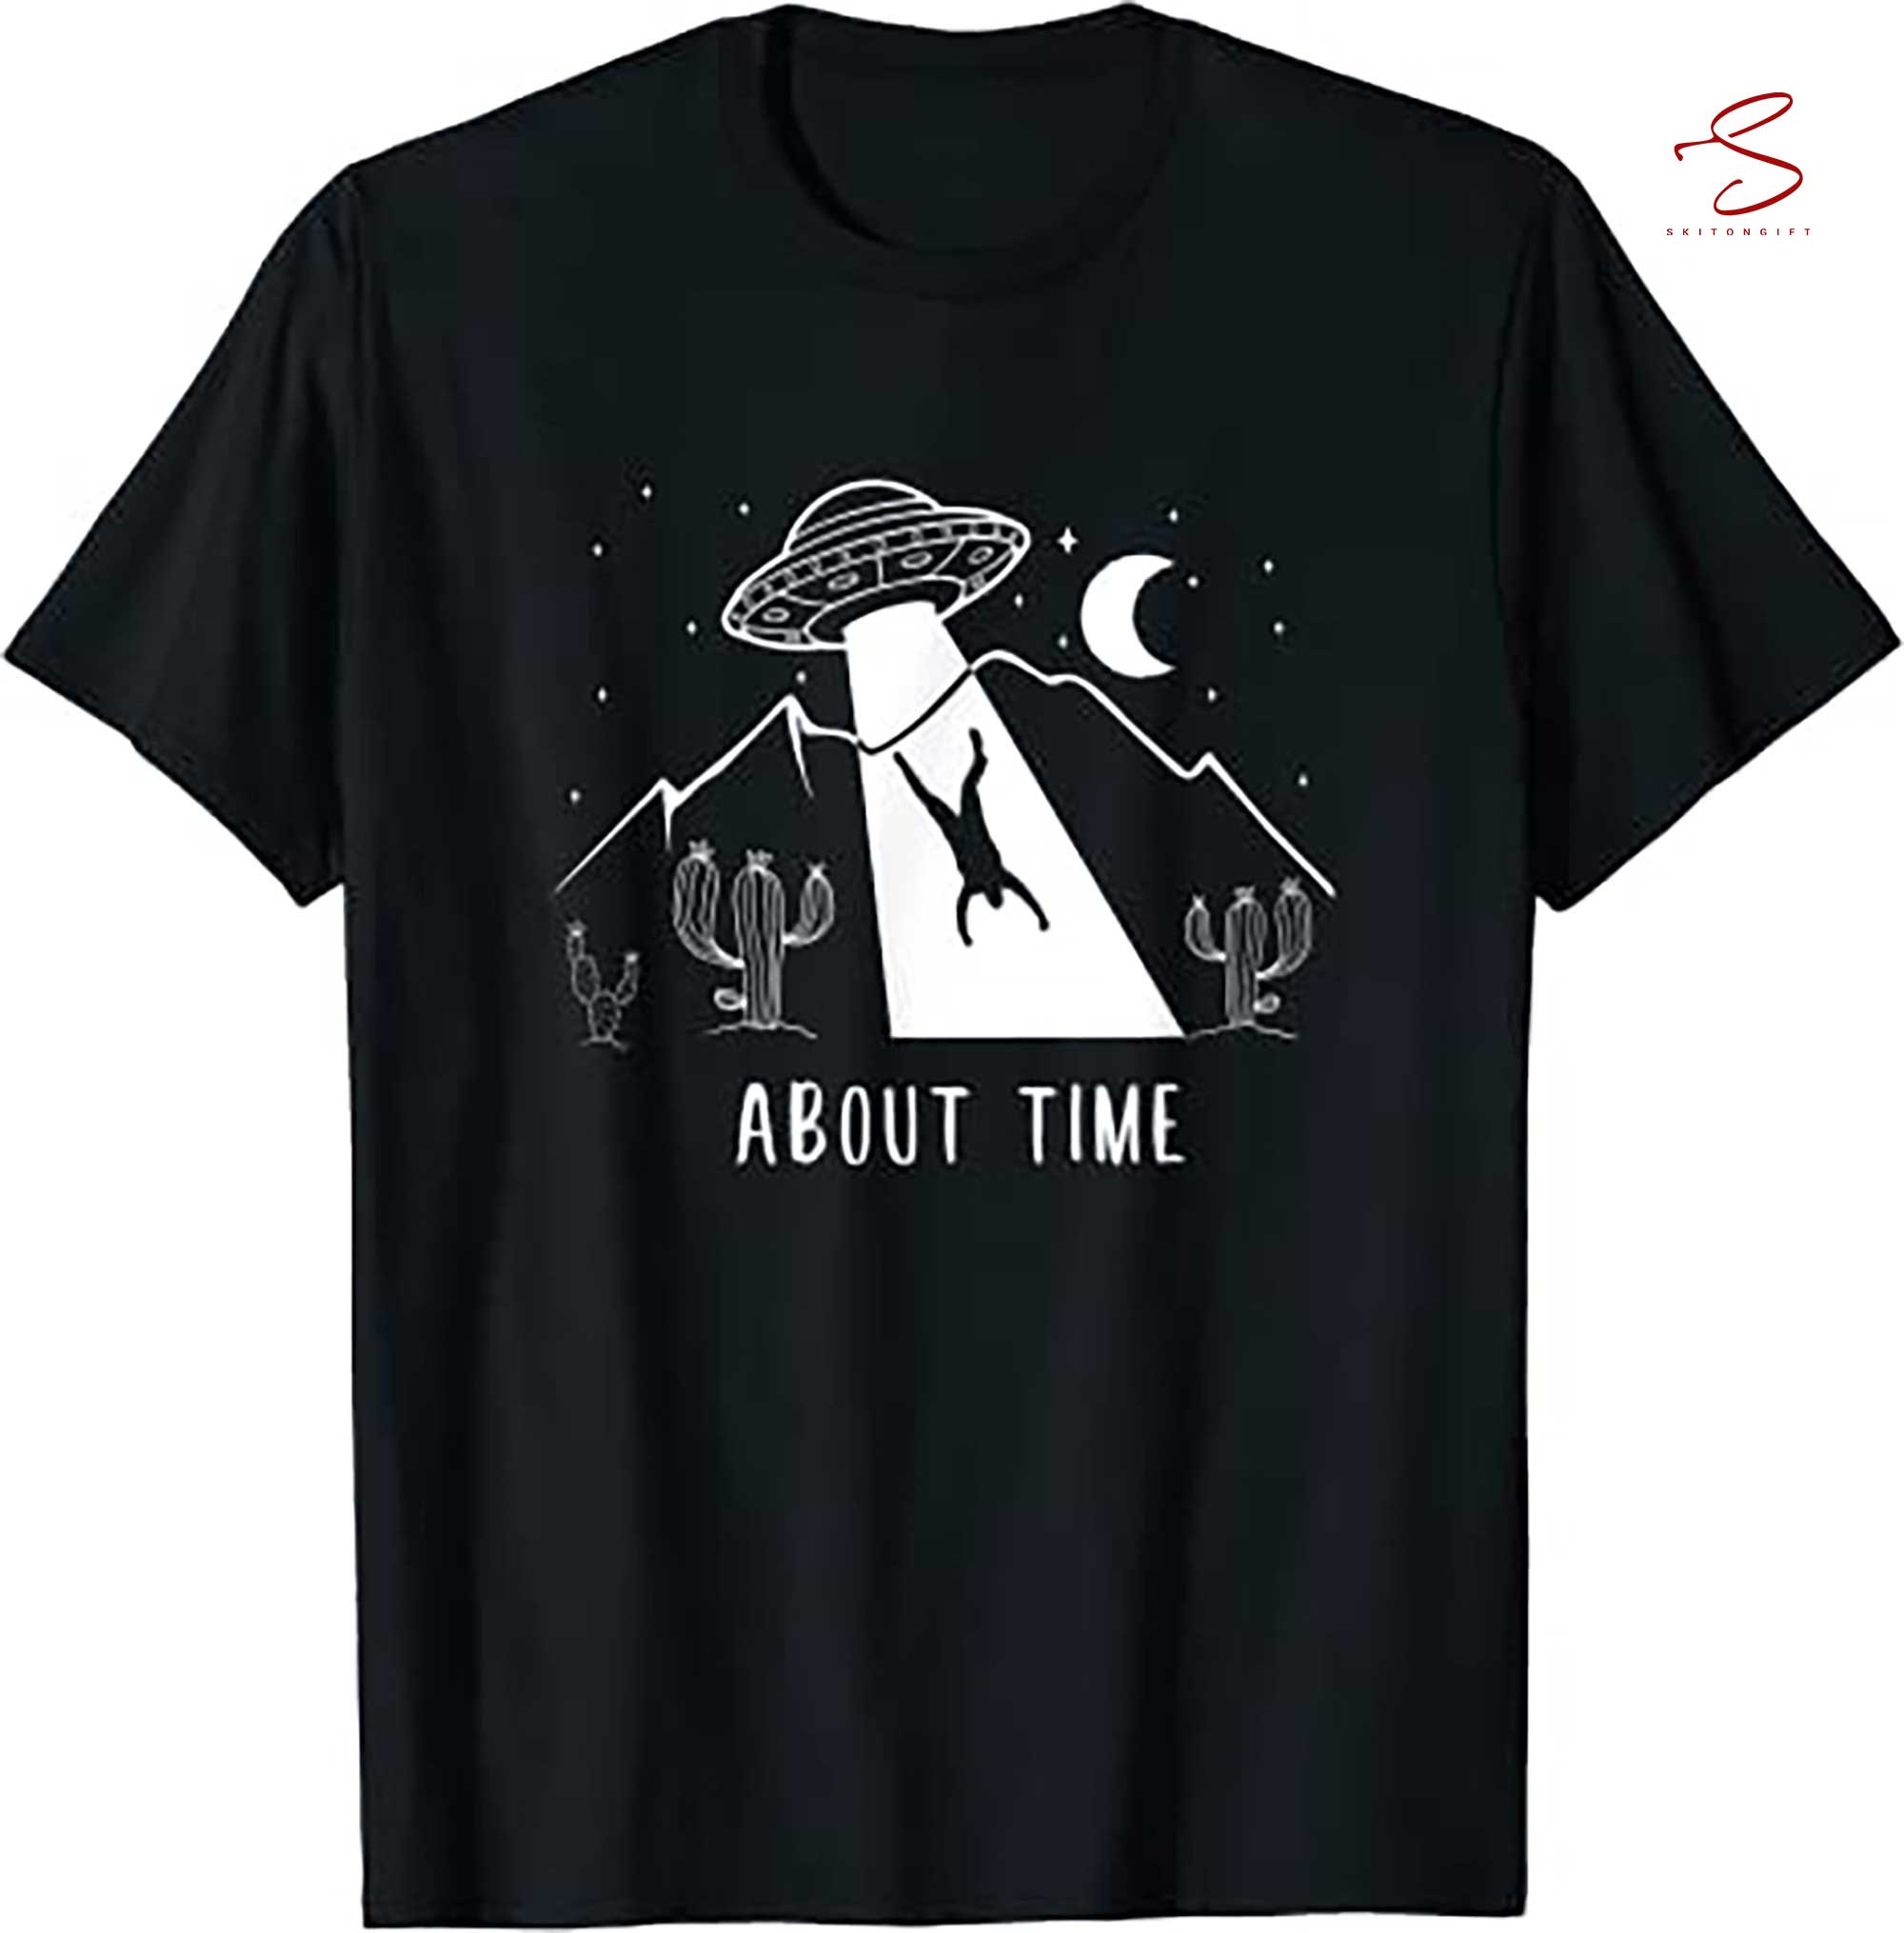 Skitongift Lover Gifts Men Women Kids Ufo Abduction About Time T Shirt